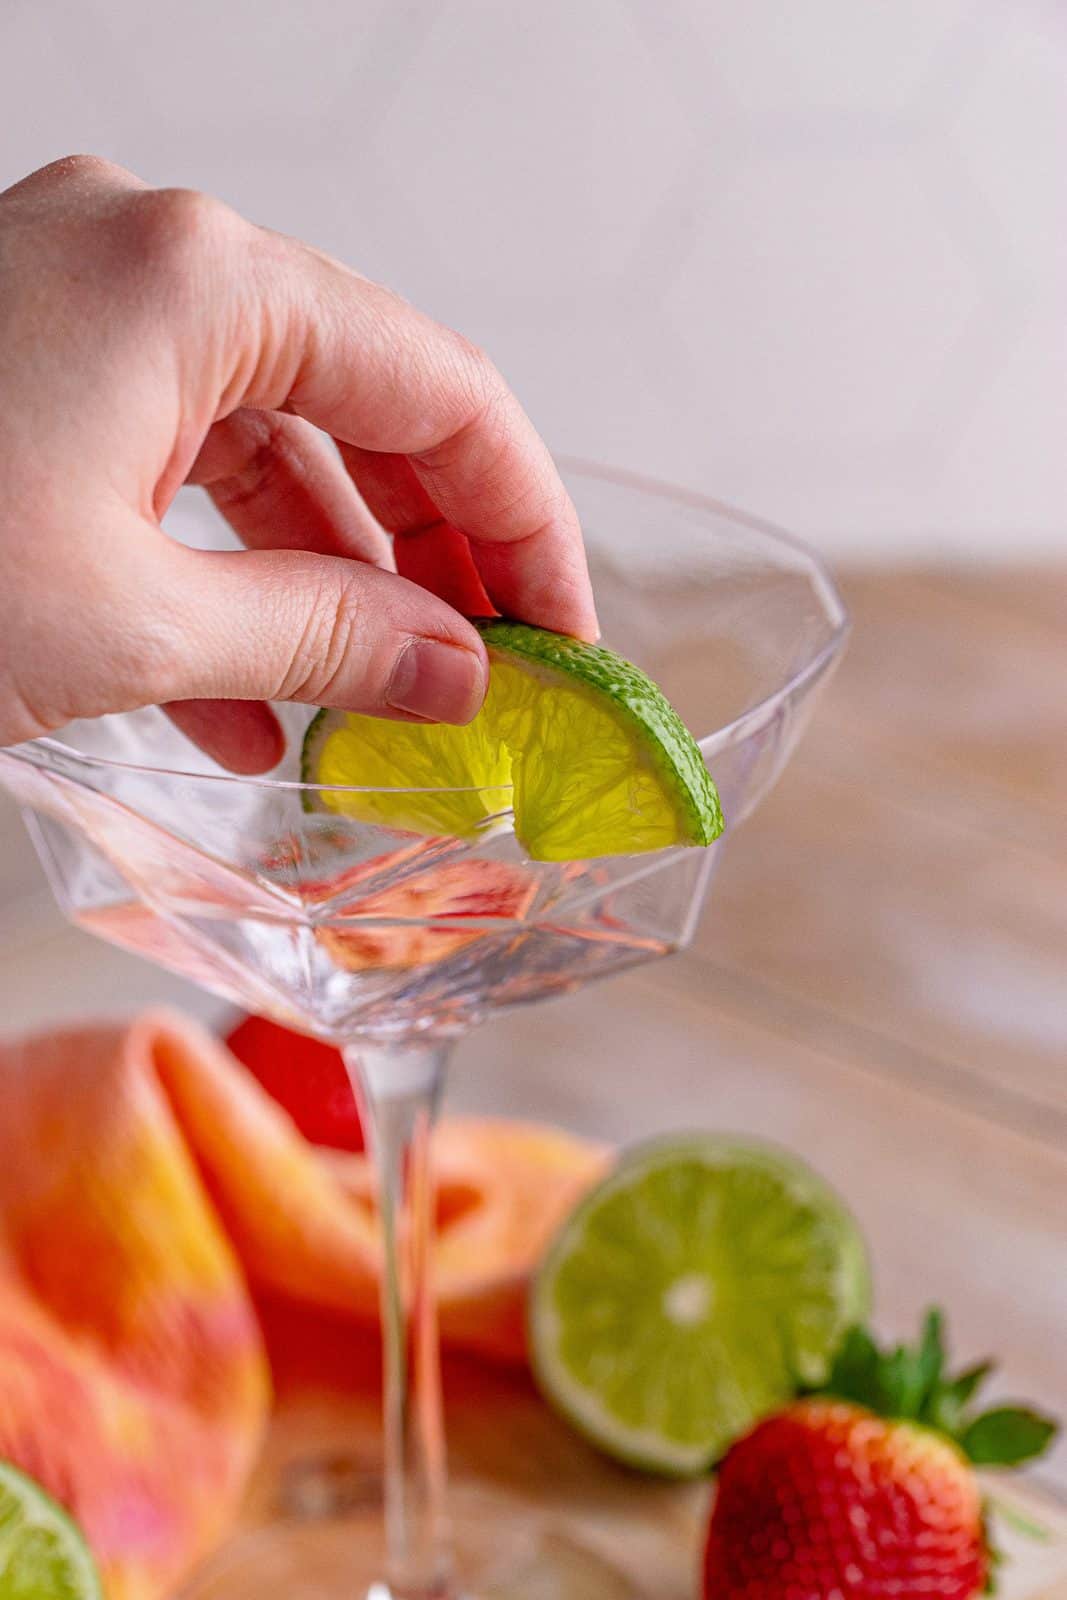 Hand wetting the edges of a glass with a lime wedge.